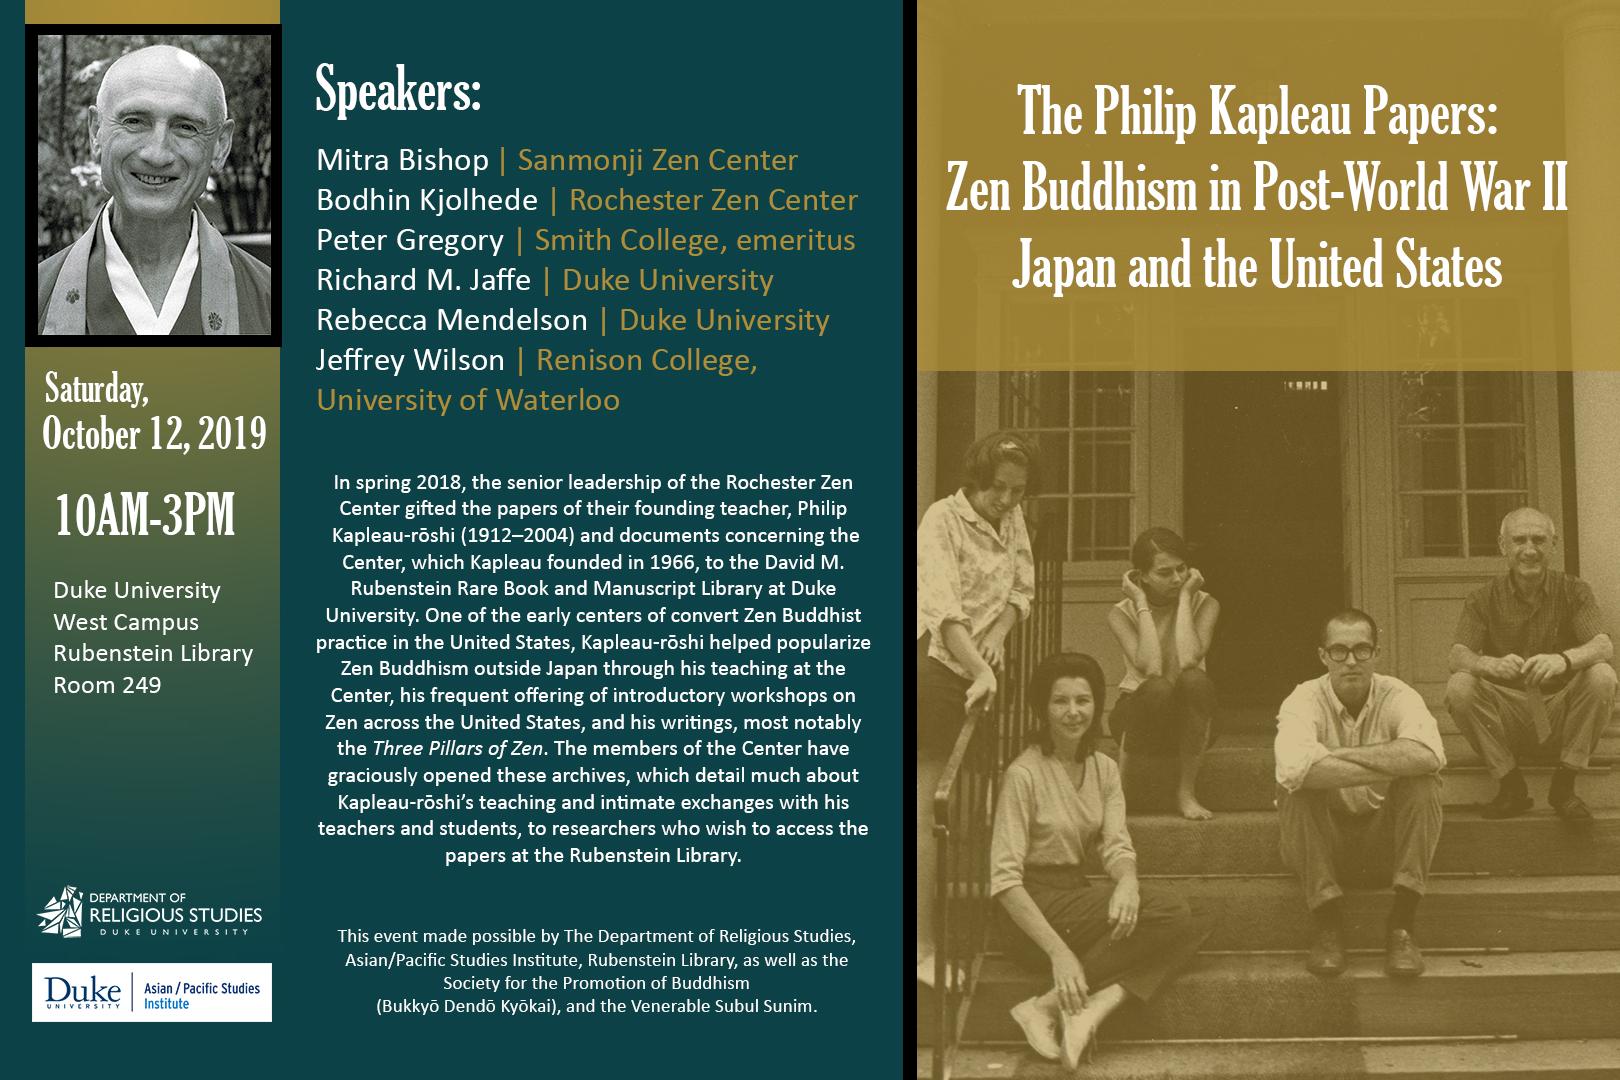 Image of Philip Kapleau and his students on the front steps of a building. Poster contains writen information about when the event takes place: Saturda, Octover 12, 2019 from 10-3PM on West Campus, Duke University in room 249 of Rubenstein Library